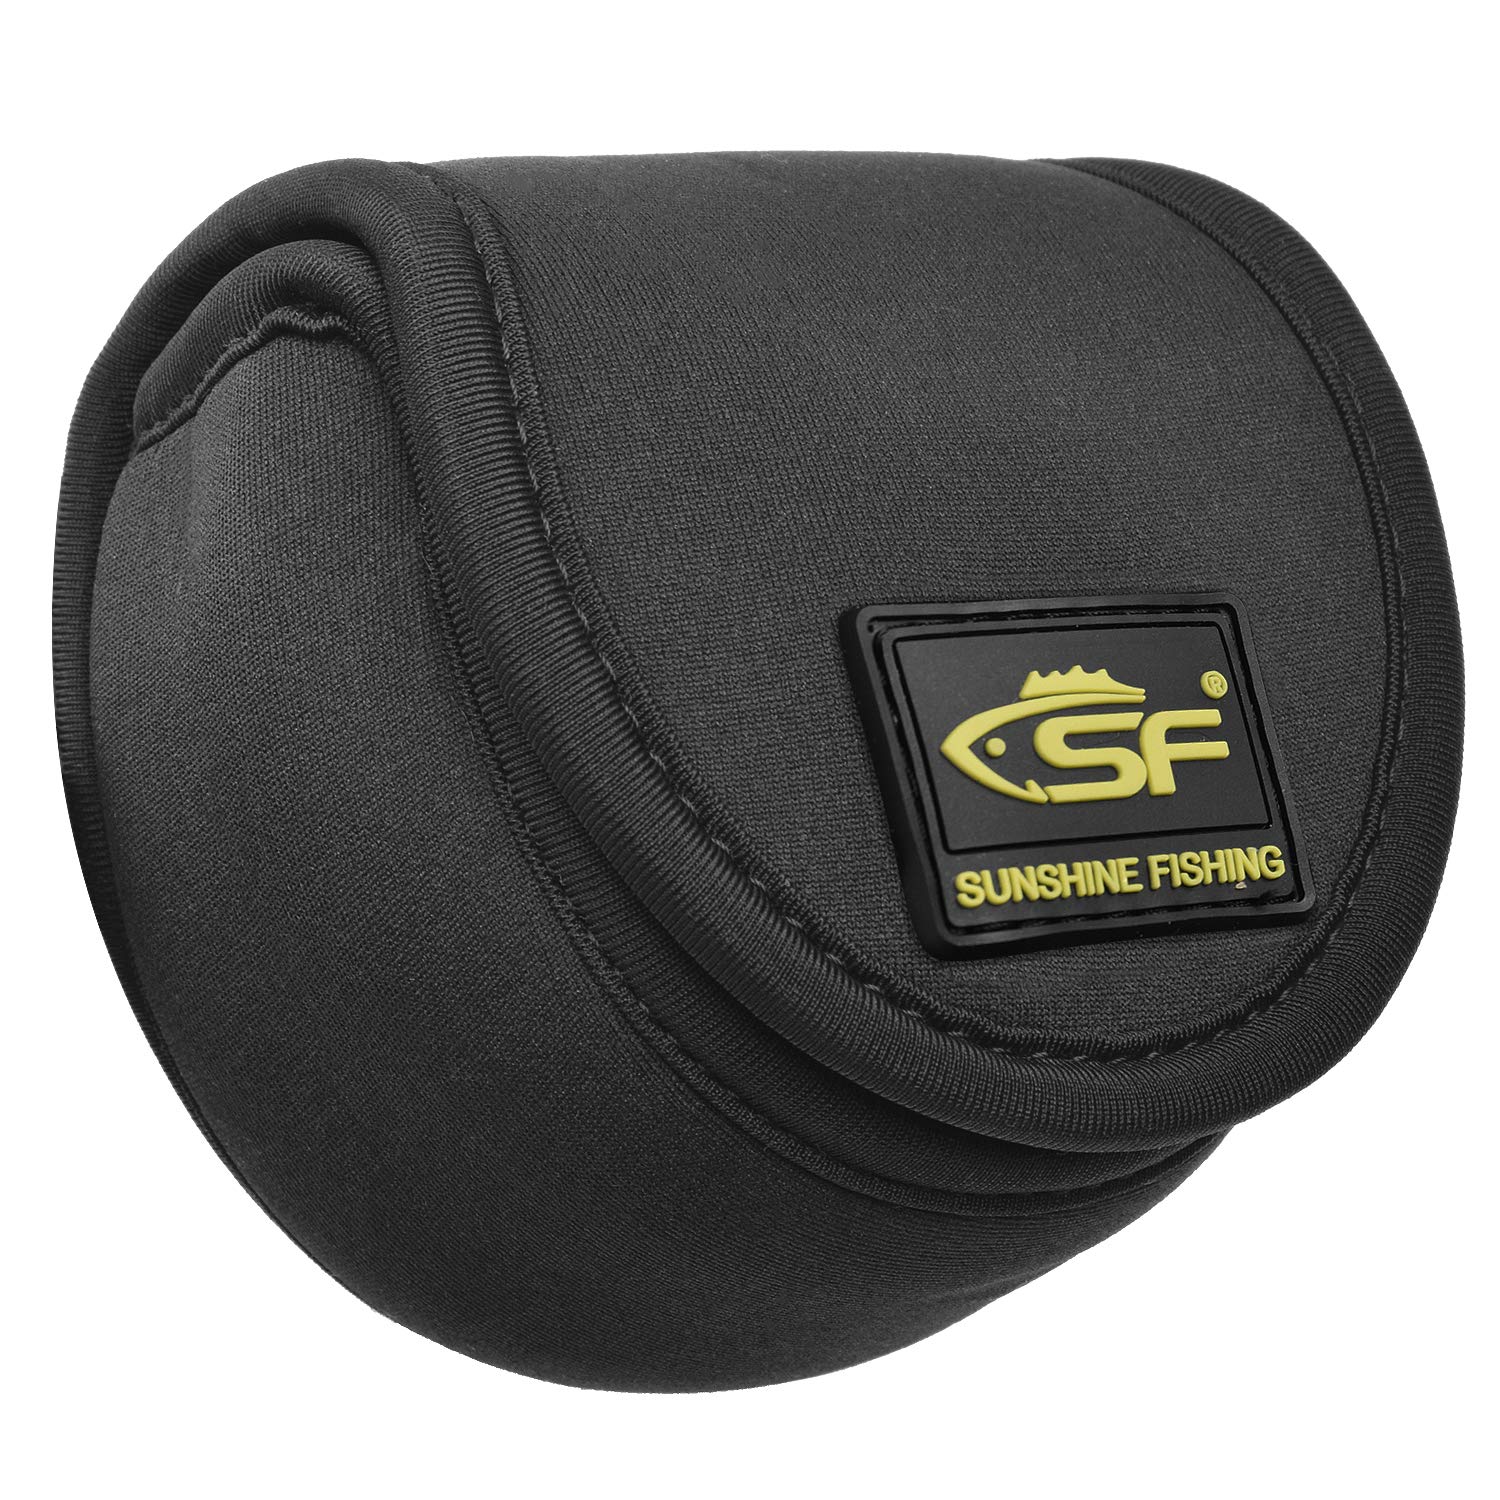 SF Fly Fishing Reel Case Pouch Cover Fit 3/4 5/6 7/8 wt